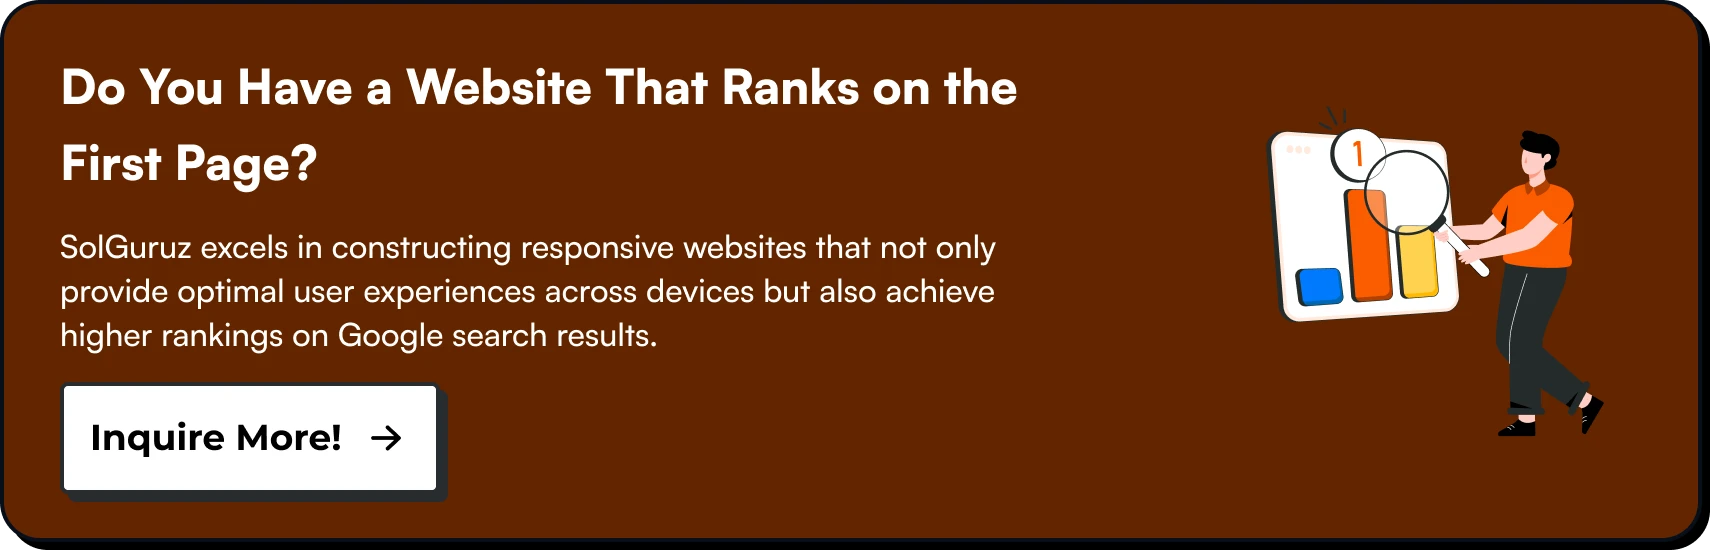 Do You Have a Website That Ranks on the First Page